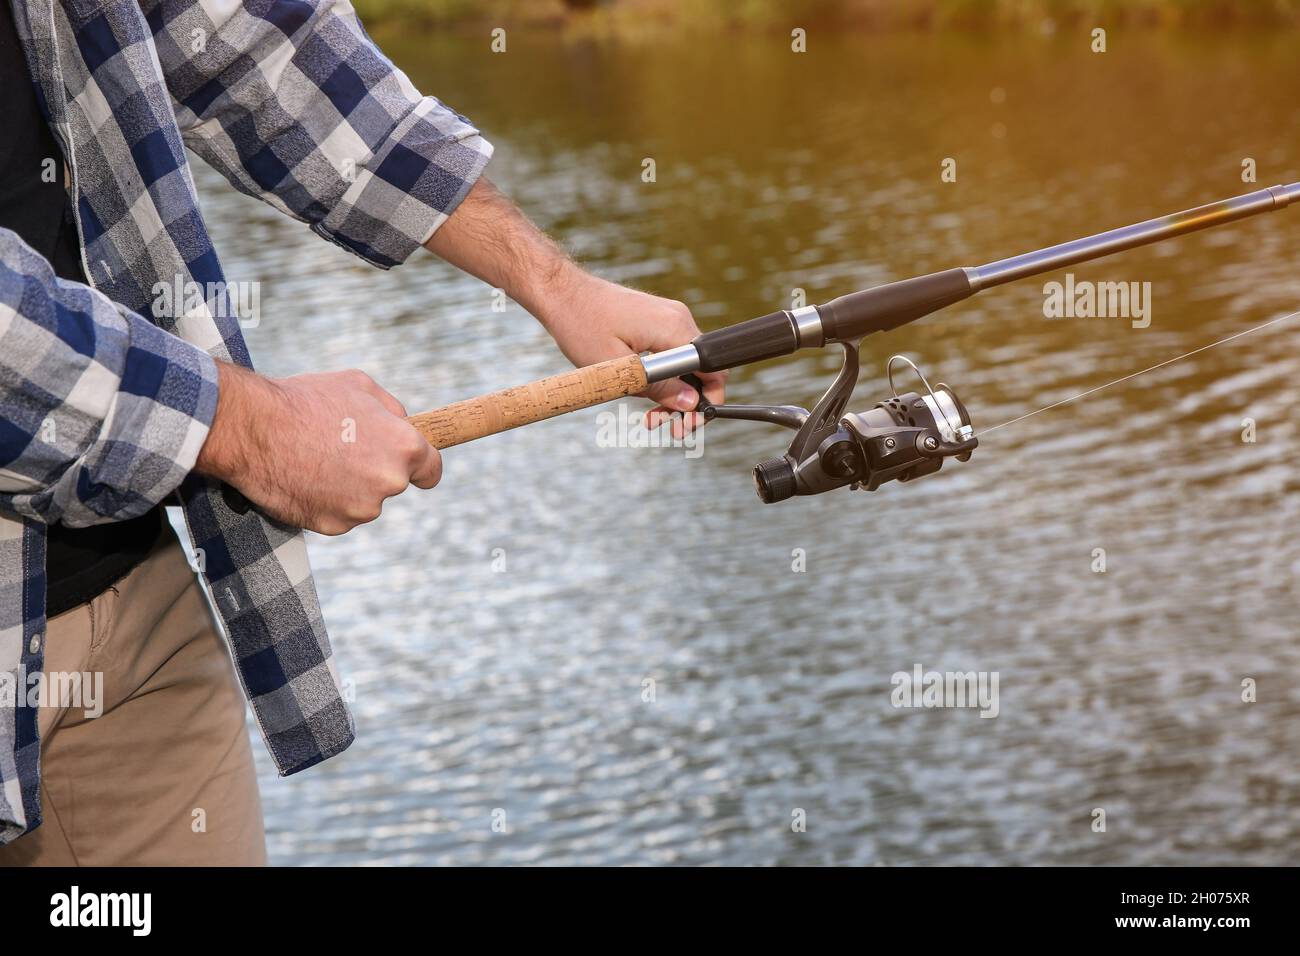 Man with rod fishing at riverside, focus on hands. Recreational